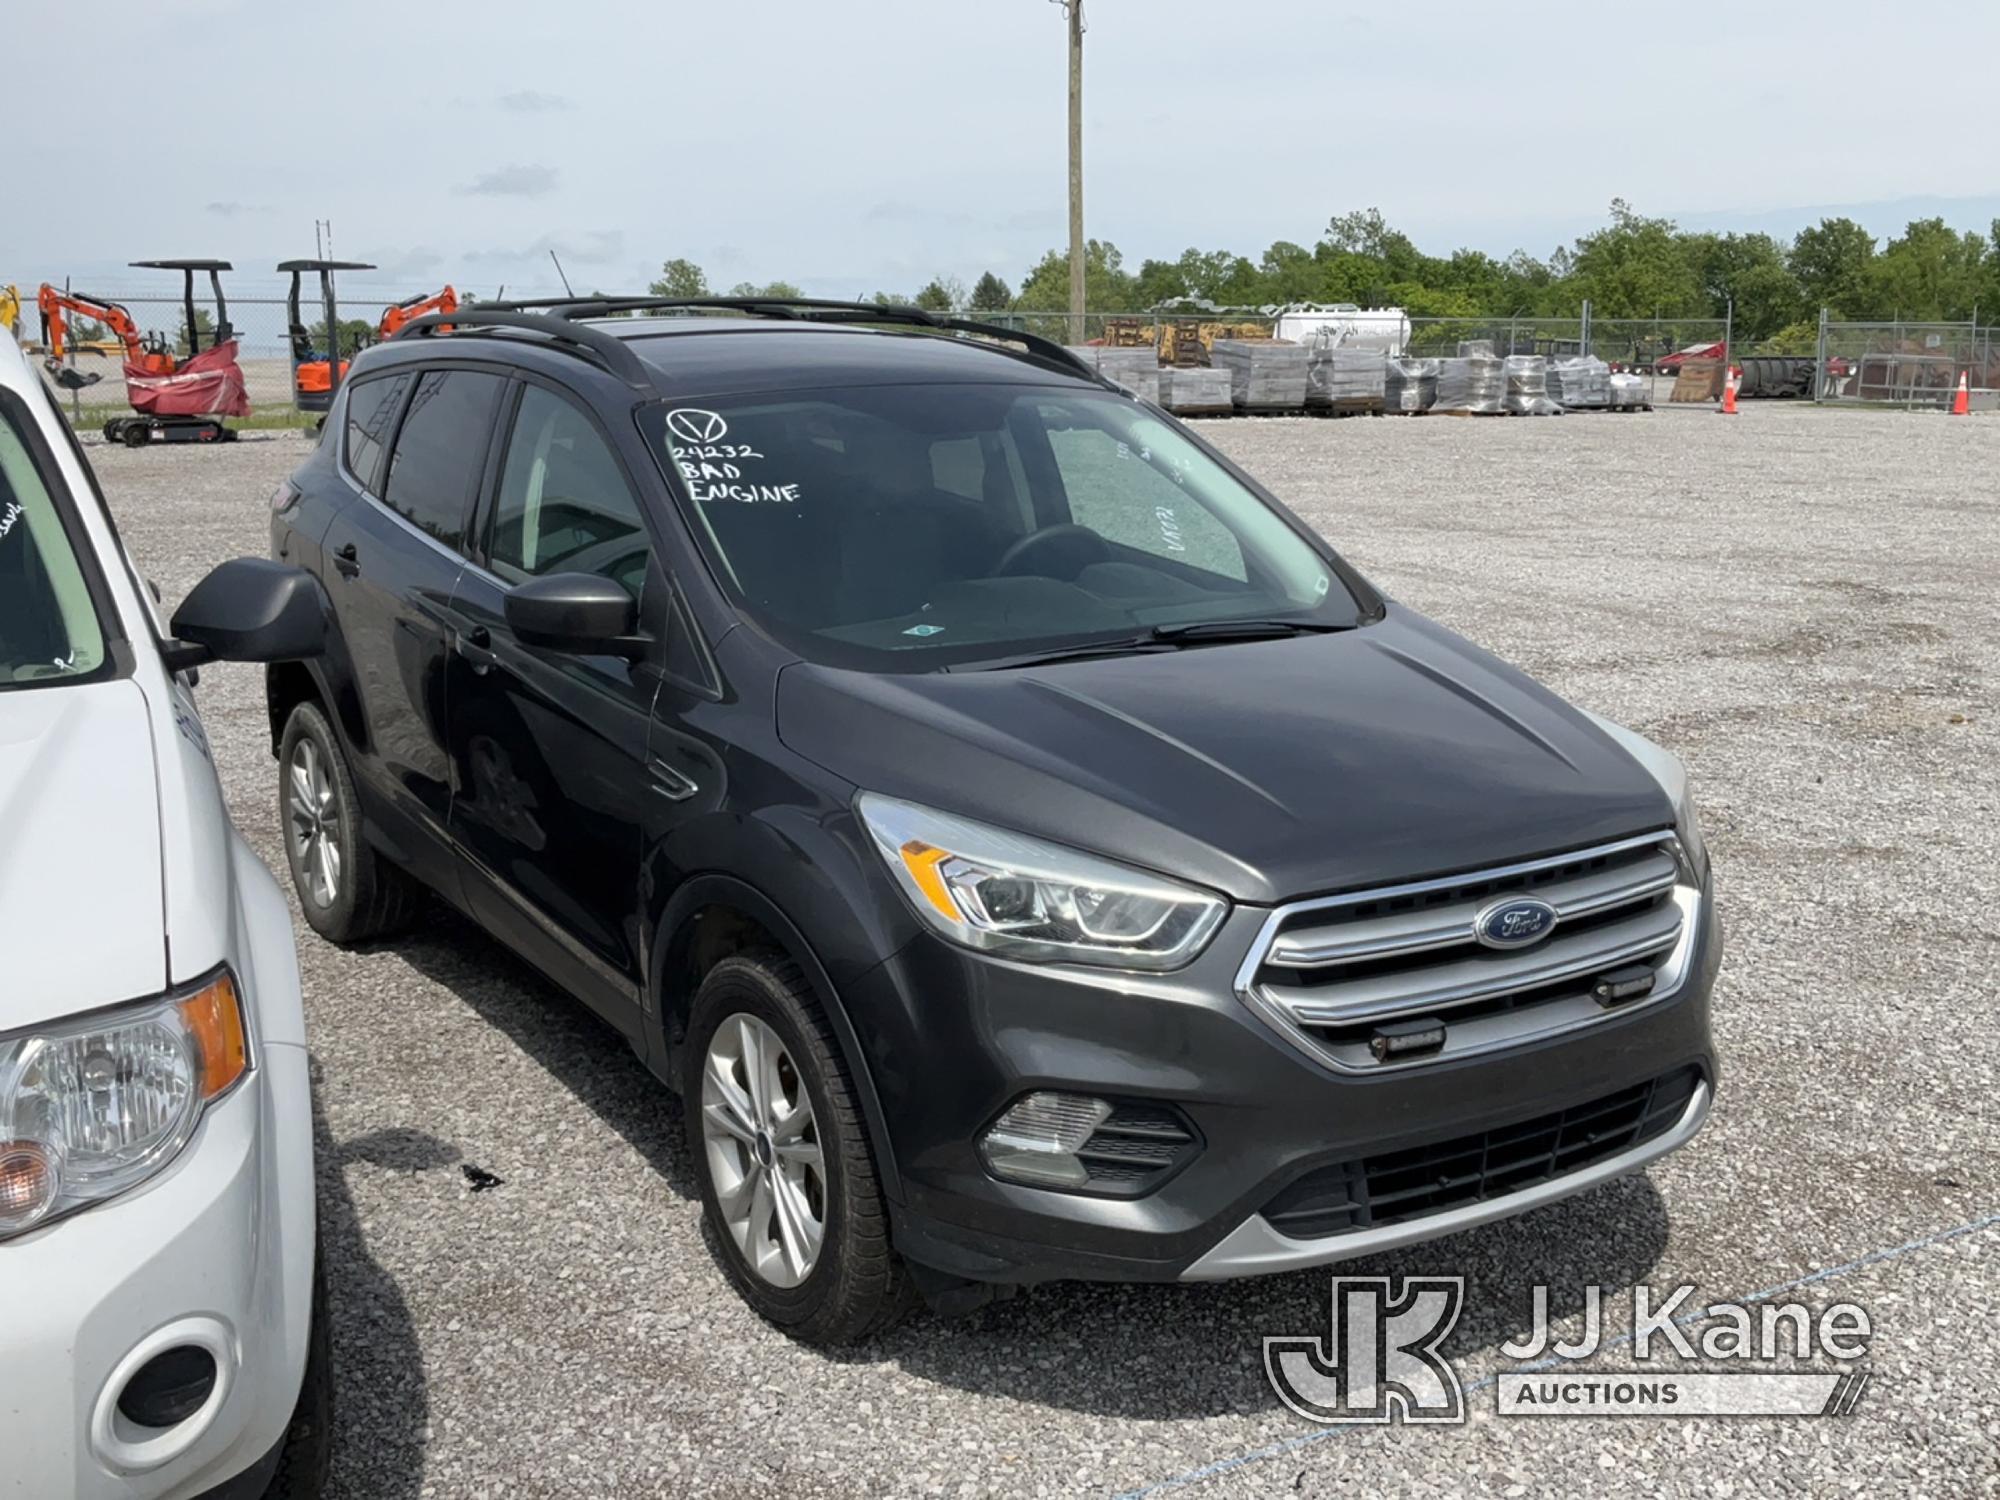 (Verona, KY) 2017 Ford Escape 4x4 4-Door Sport Utility Vehicle Not Running Condition Unknown) (Crank